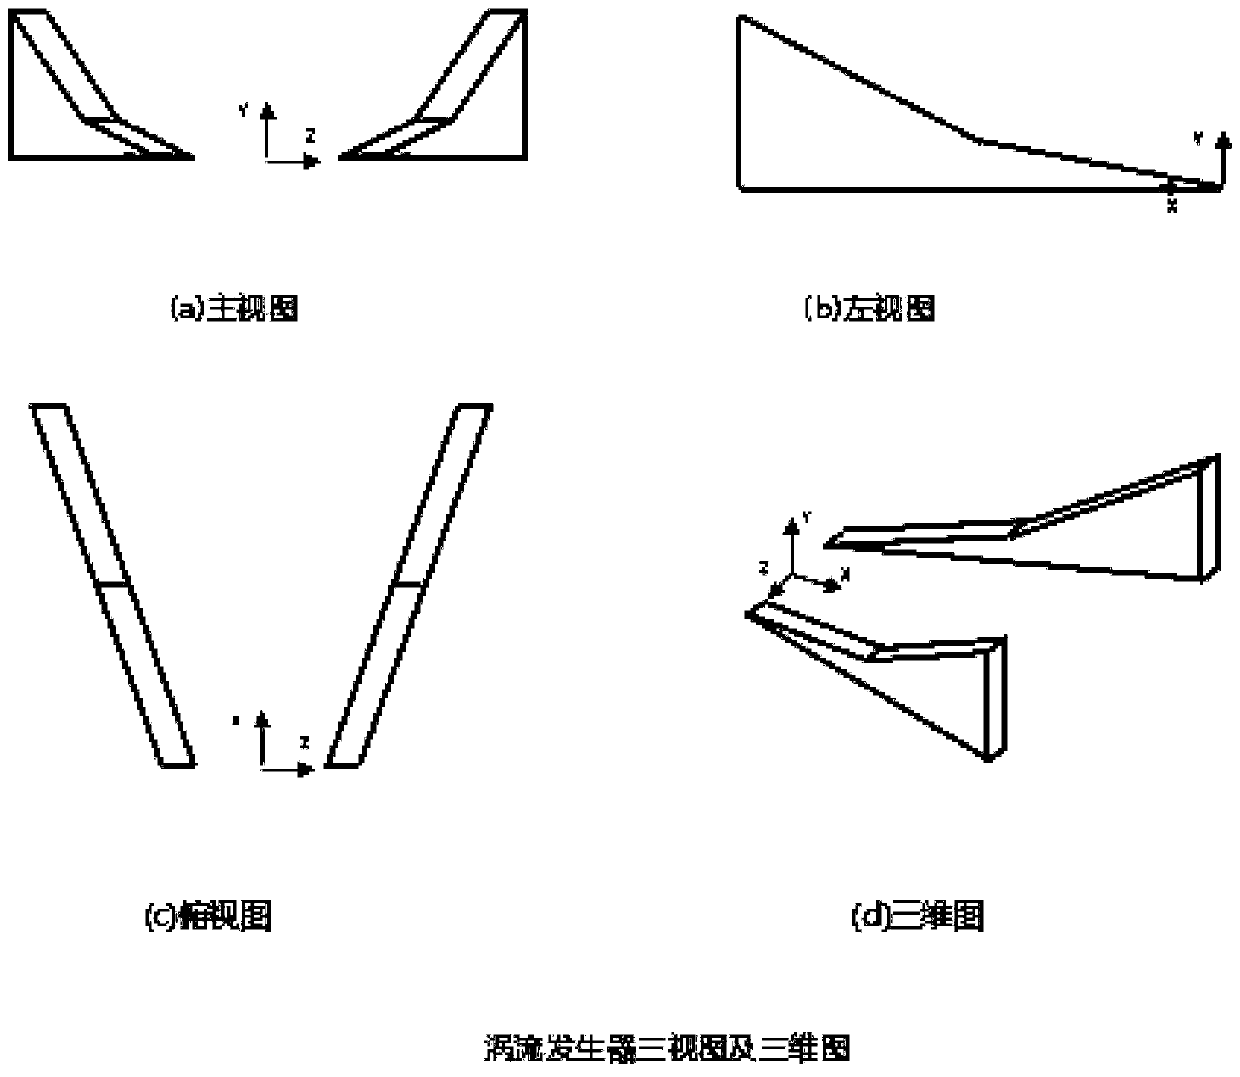 Vortex generator for reducing resistance of fuselage and delaying airflow separation